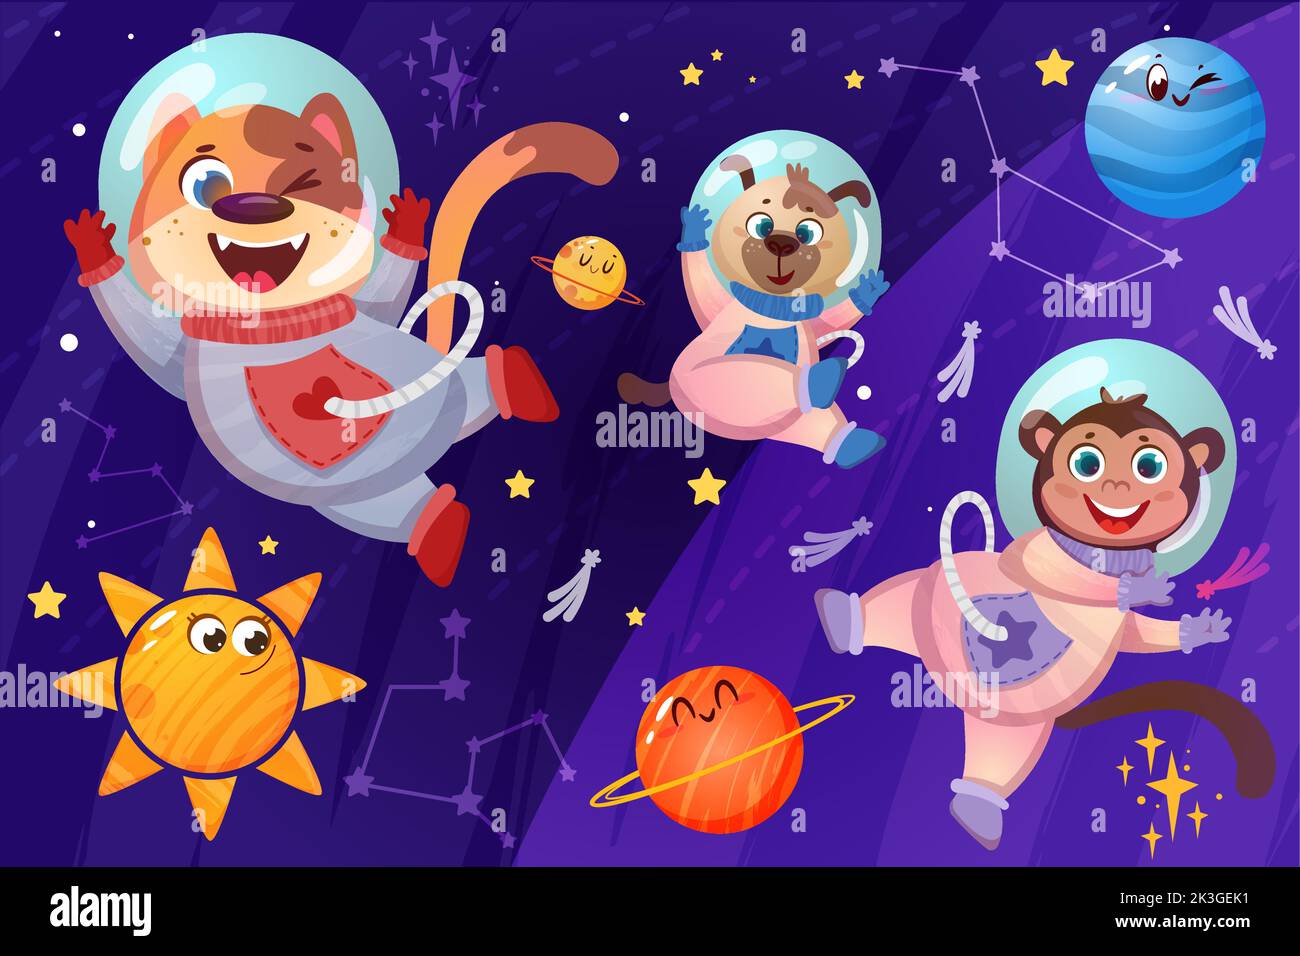 Cute animals astronauts in spacesuits flying in open space. Happy dogs and monkey cosmonauts in helmet exploring universe galaxy with planets, stars and constellations cartoon vector illustration. Stock Vector